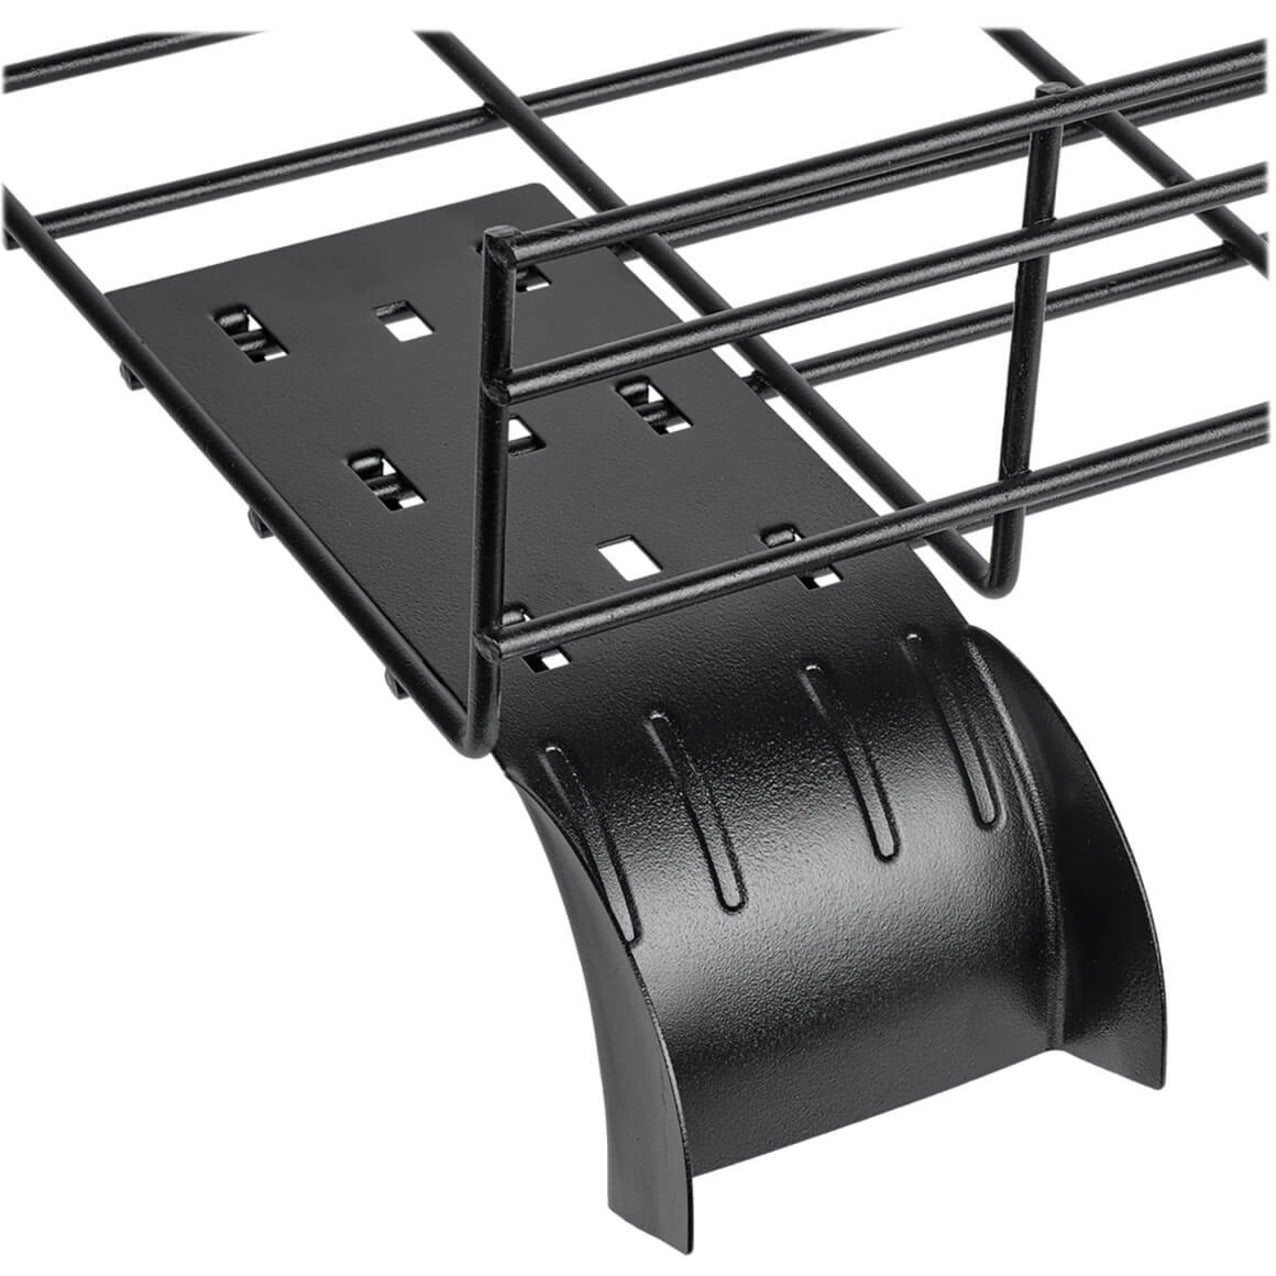 Tripp Lite SRWBWTRFL Cable Exit Clip/Dropout Waterfall for Wire Mesh Cable Trays, 90 mm Wide